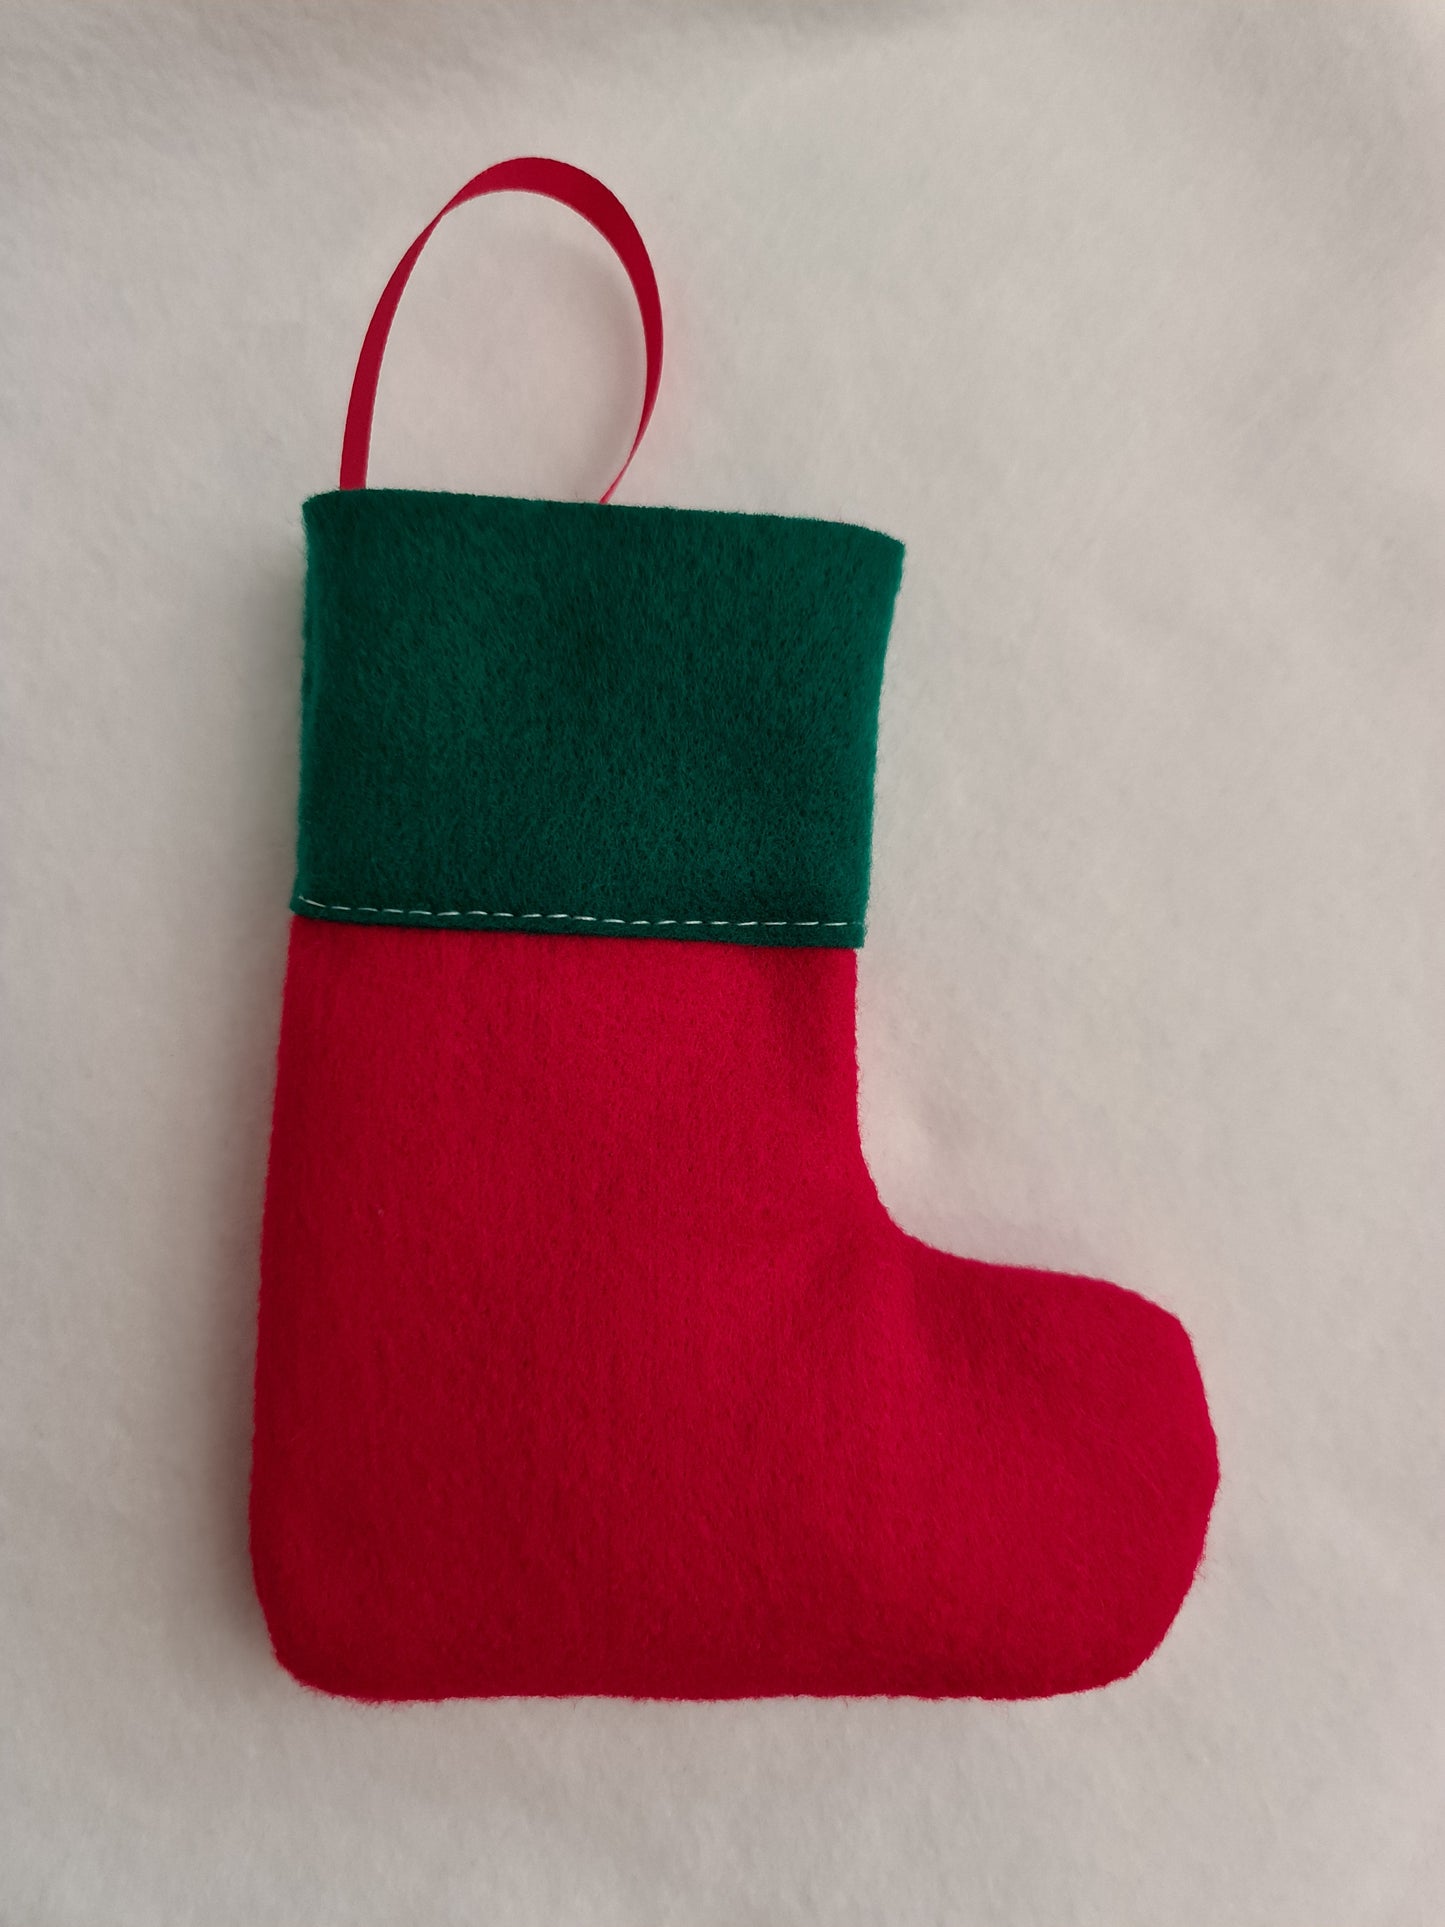 Personalised Christmas stocking - red and green